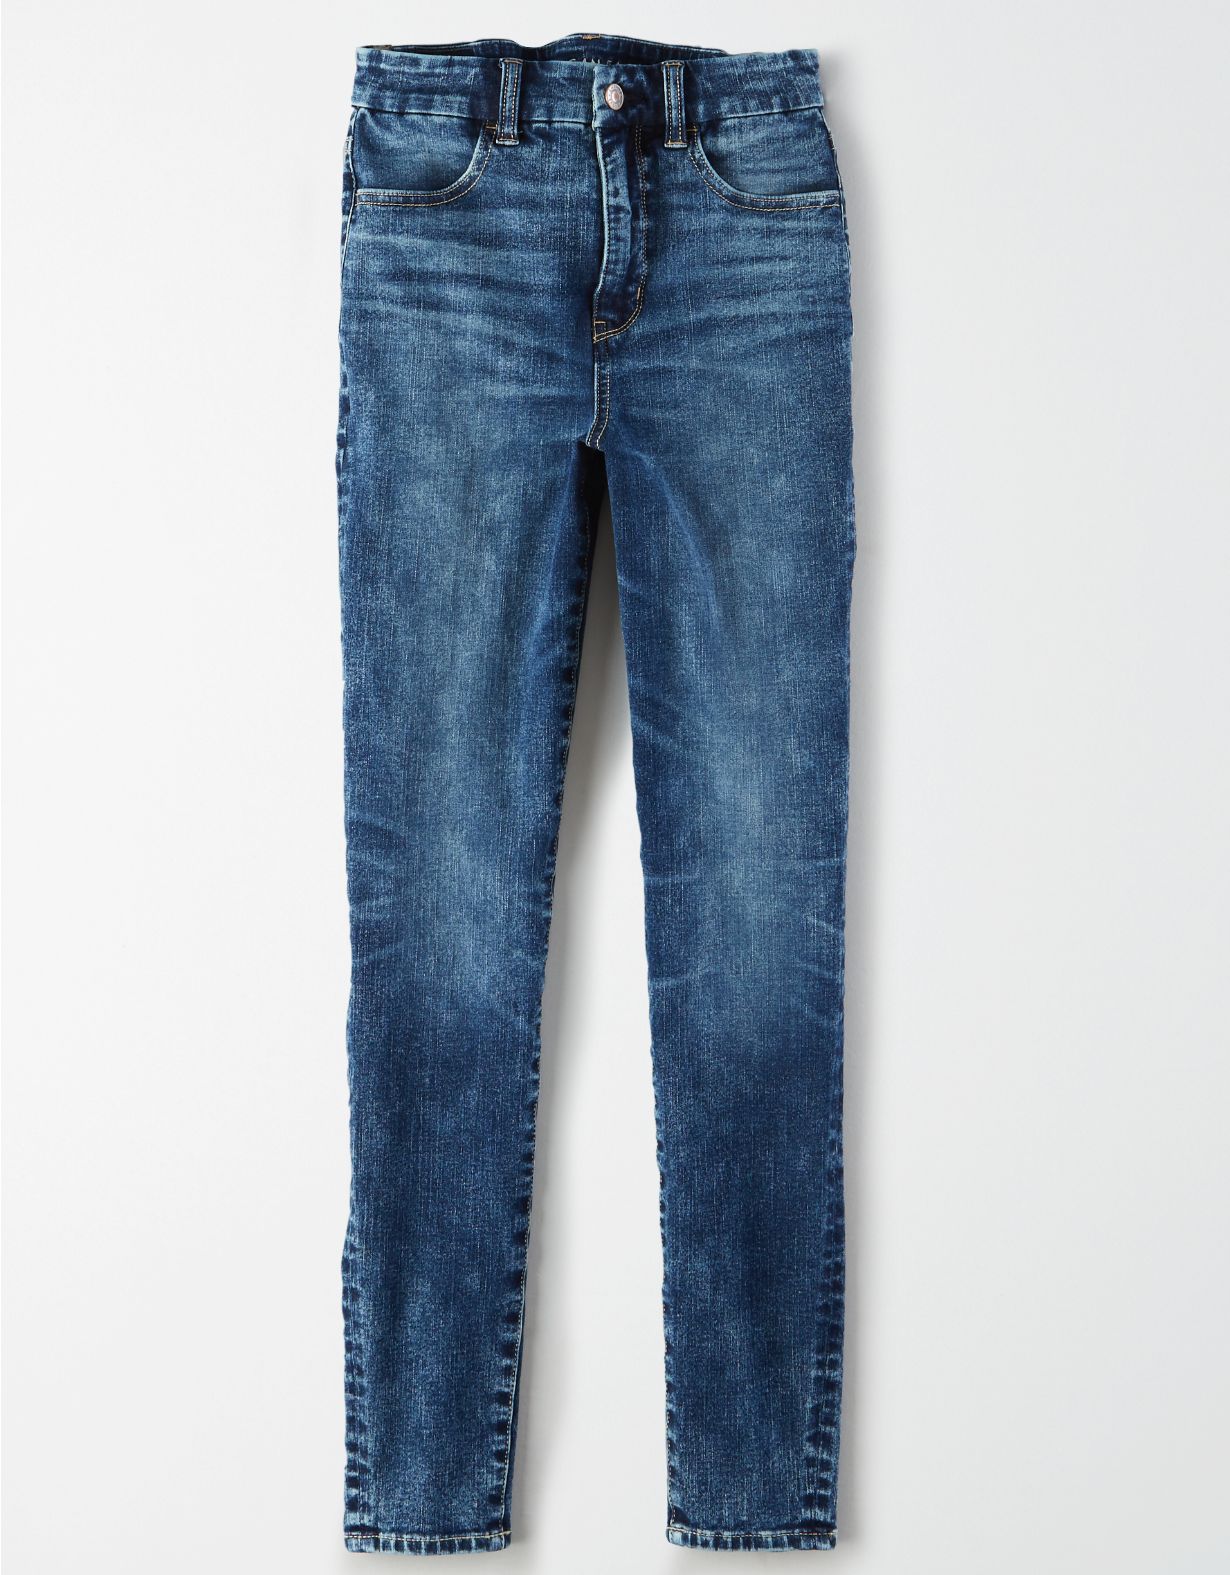 The Dream Jean Curvy Super High-Waisted Jegging